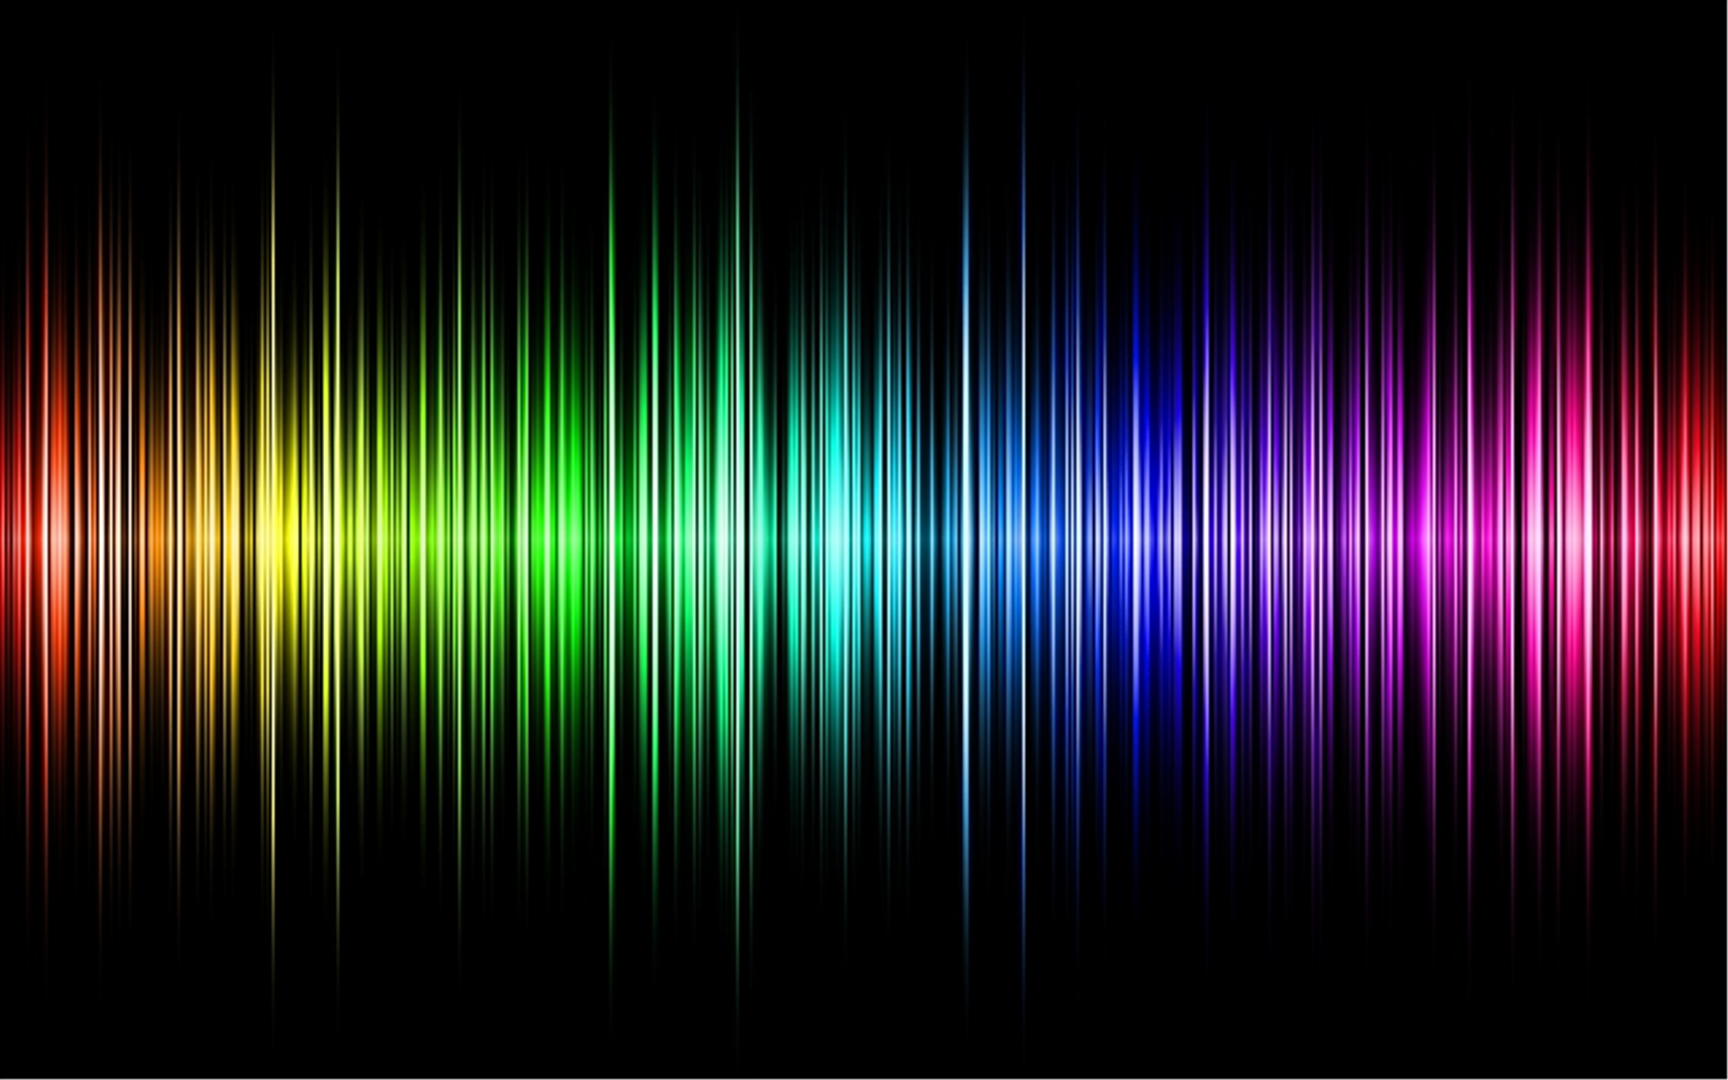 Diffraction gratings can separate white light by its wavelength components to create a spectrum of color. Courtesy of Pinterest. 